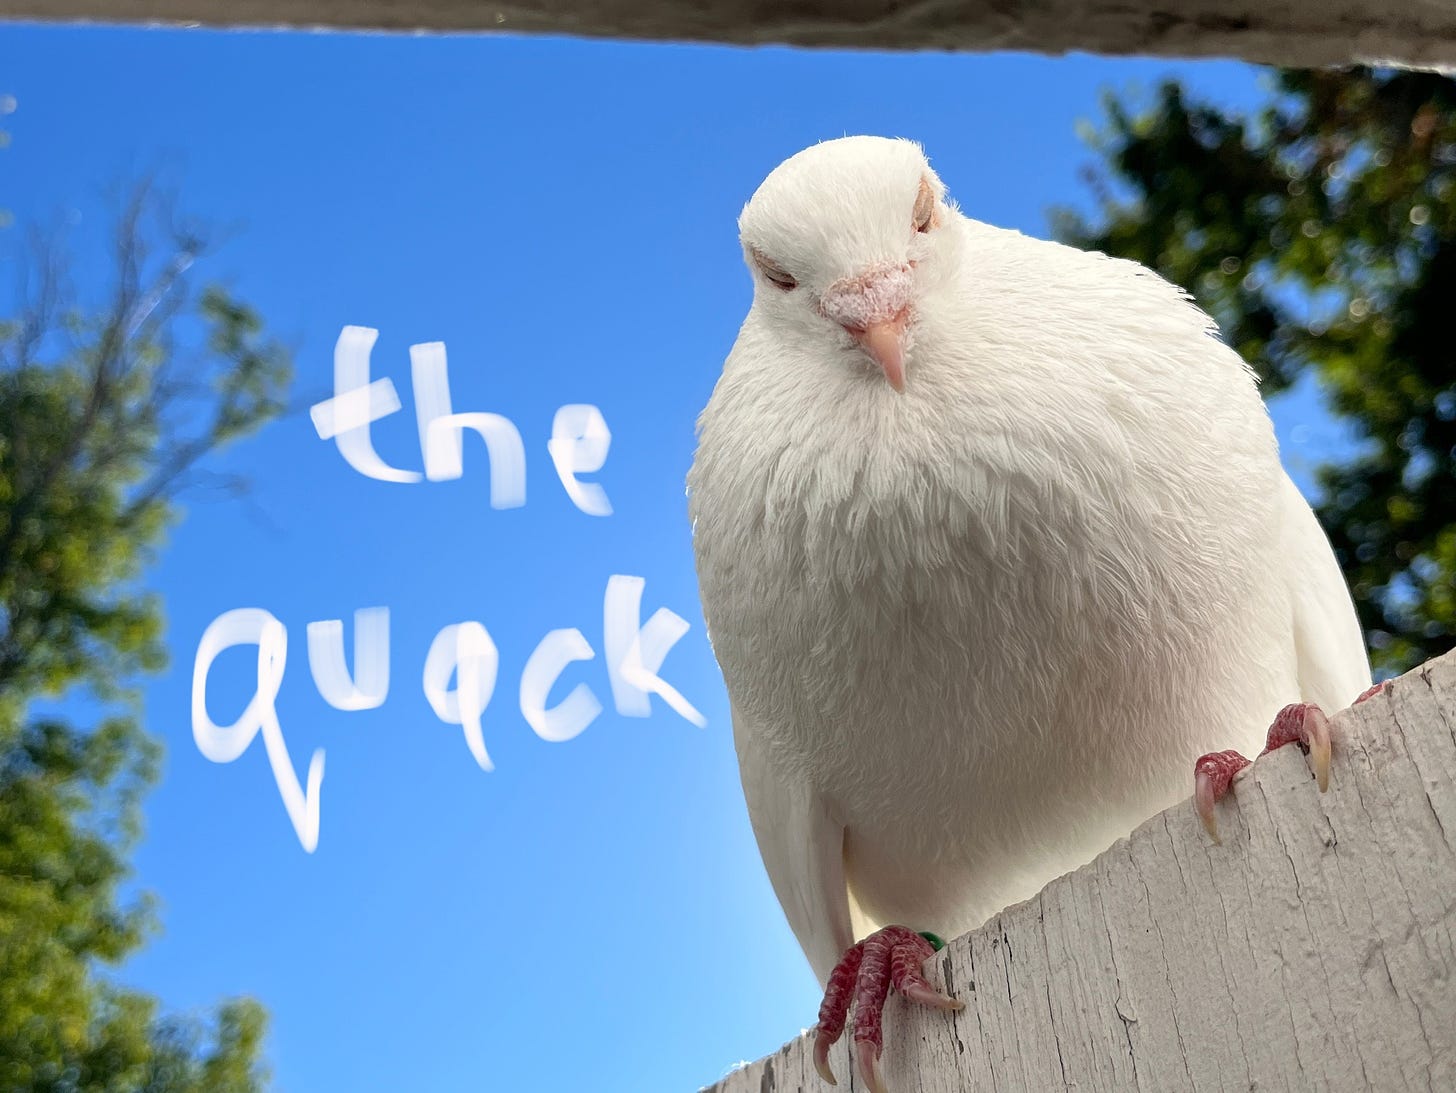 A white pigeon sits on top of a slightly open door looking down. a blue sky framed with a few leafy branches is in the background. the words "the quack" are written in fuzzy white letters against the sky